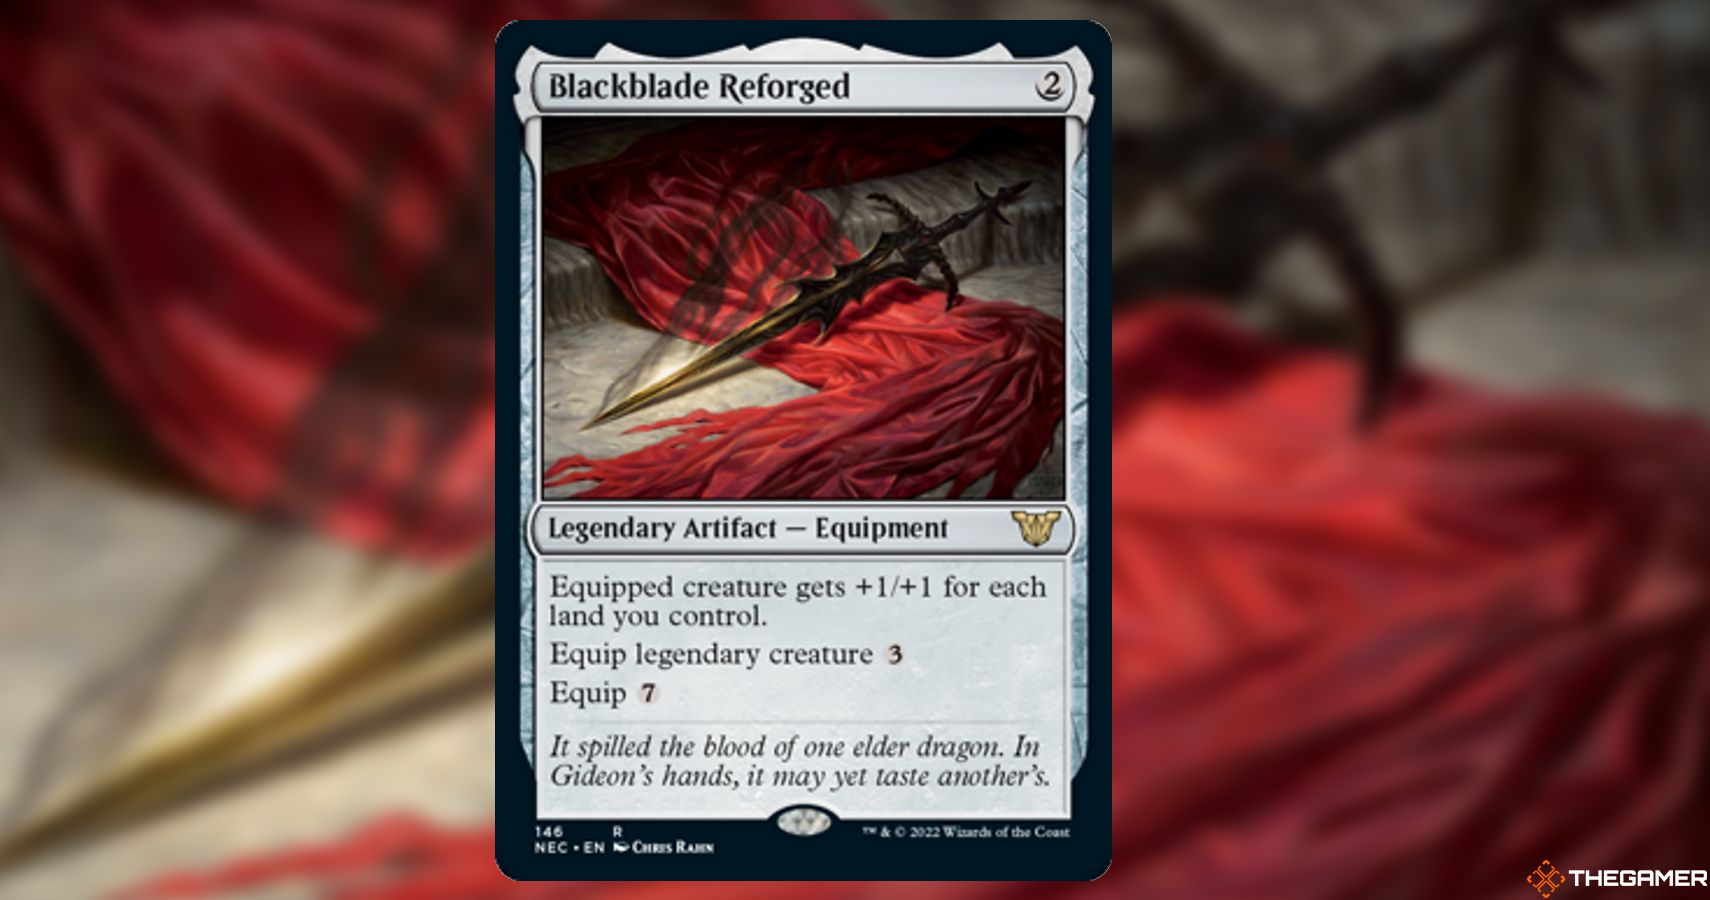 Image of the Blackblade Reforged card in Magic: The Gathering, with art by Chris Rahn